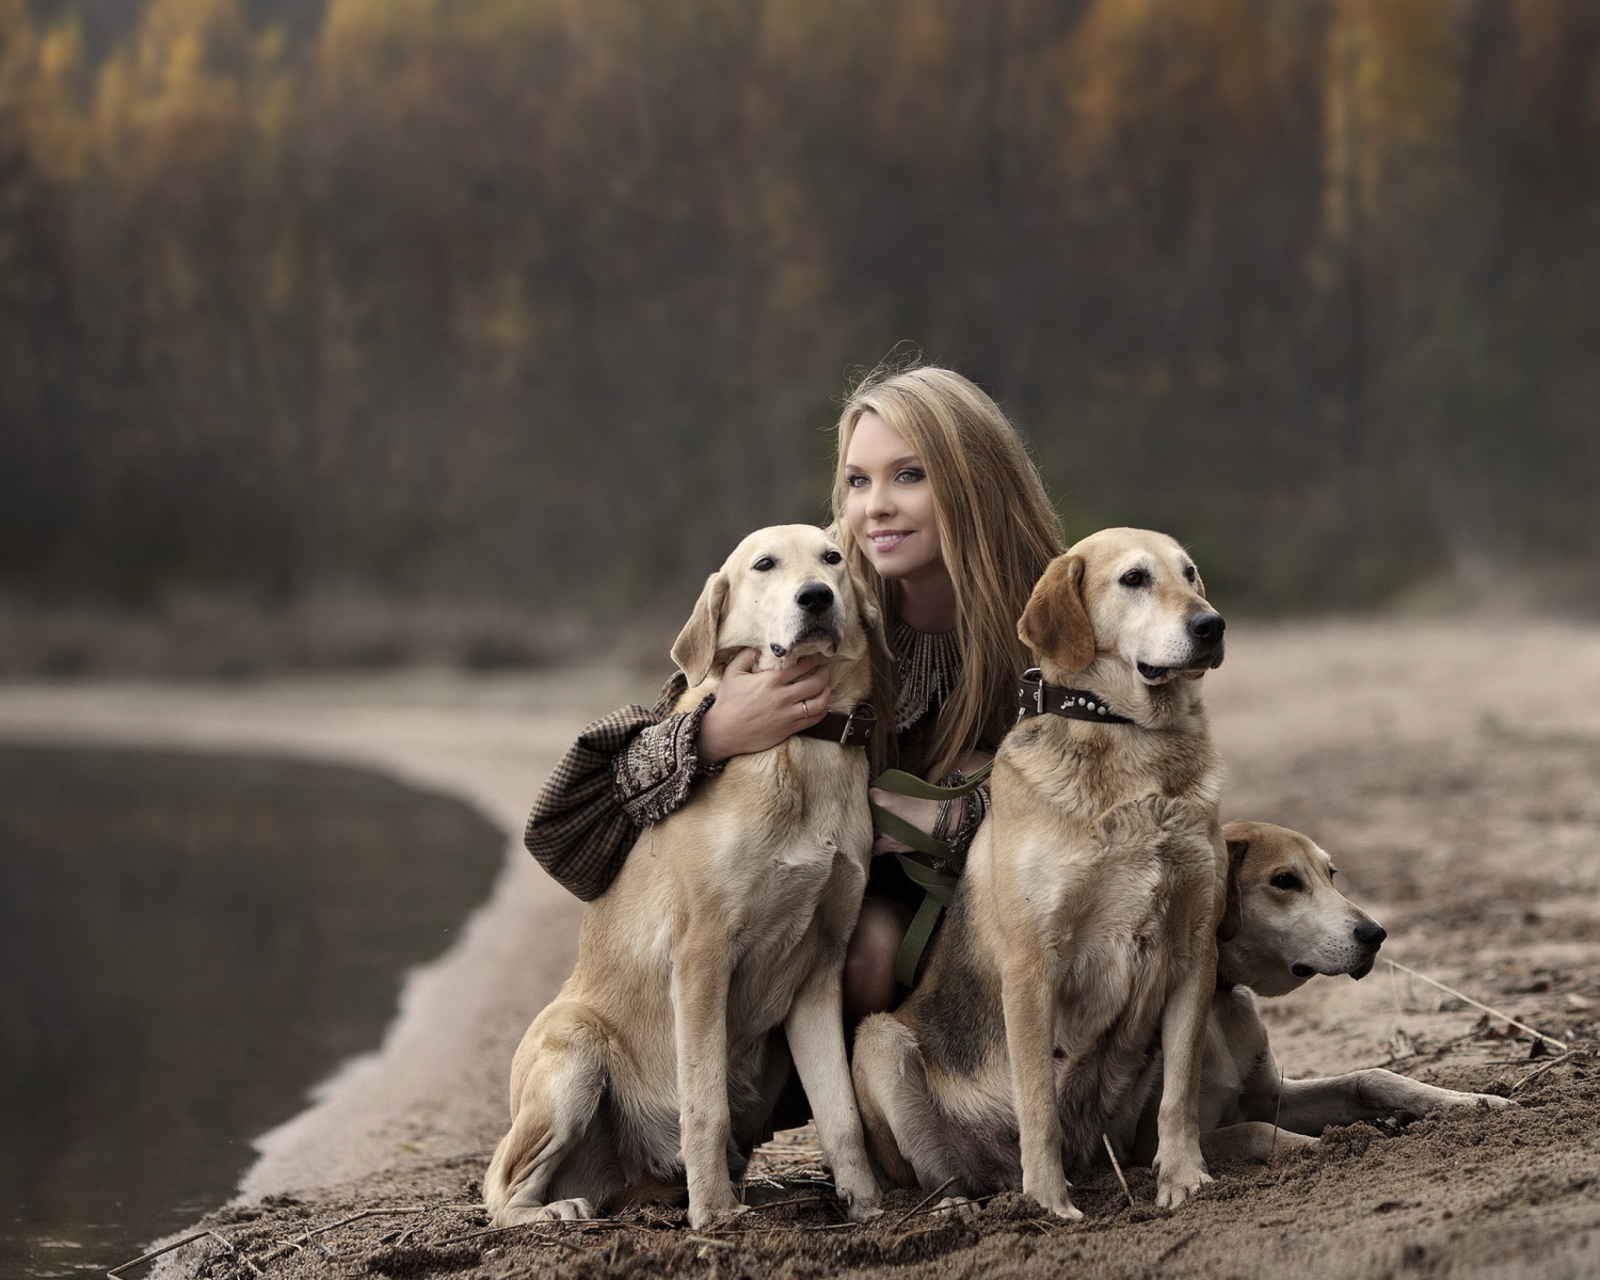 Girl With Dogs wallpaper 1600x1280